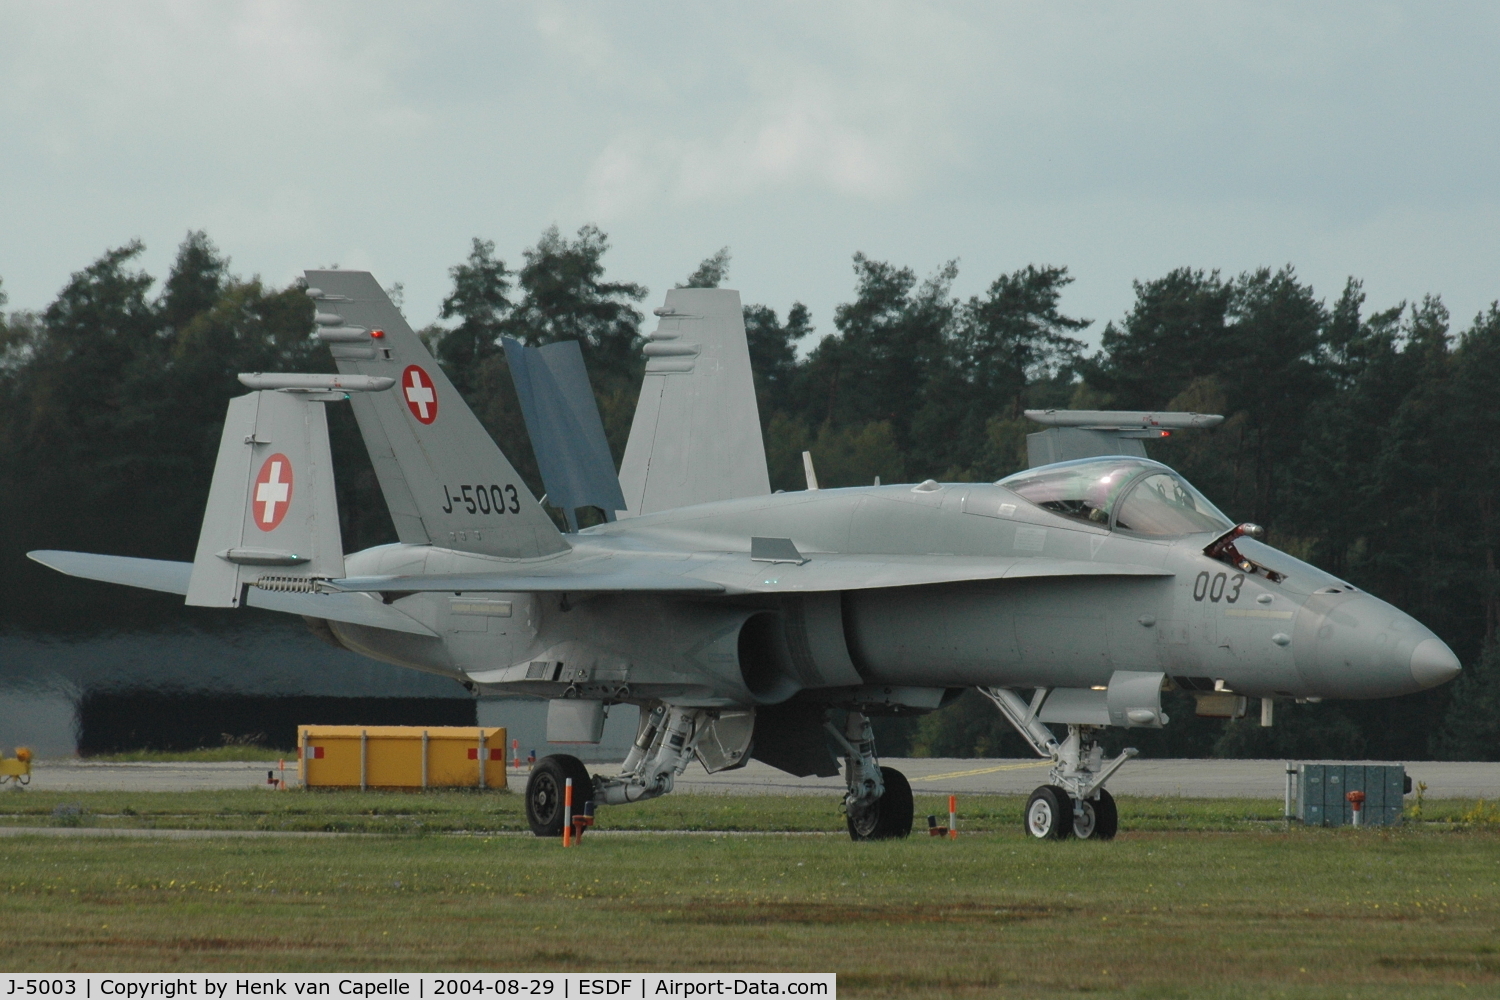 J-5003, 1997 McDonnell Douglas F/A-18C Hornet C/N 1319, Quite a collection of movable parts, this Swiss Air Force F-18, seen here at Ronneby Air Base in Sweden, 2004.